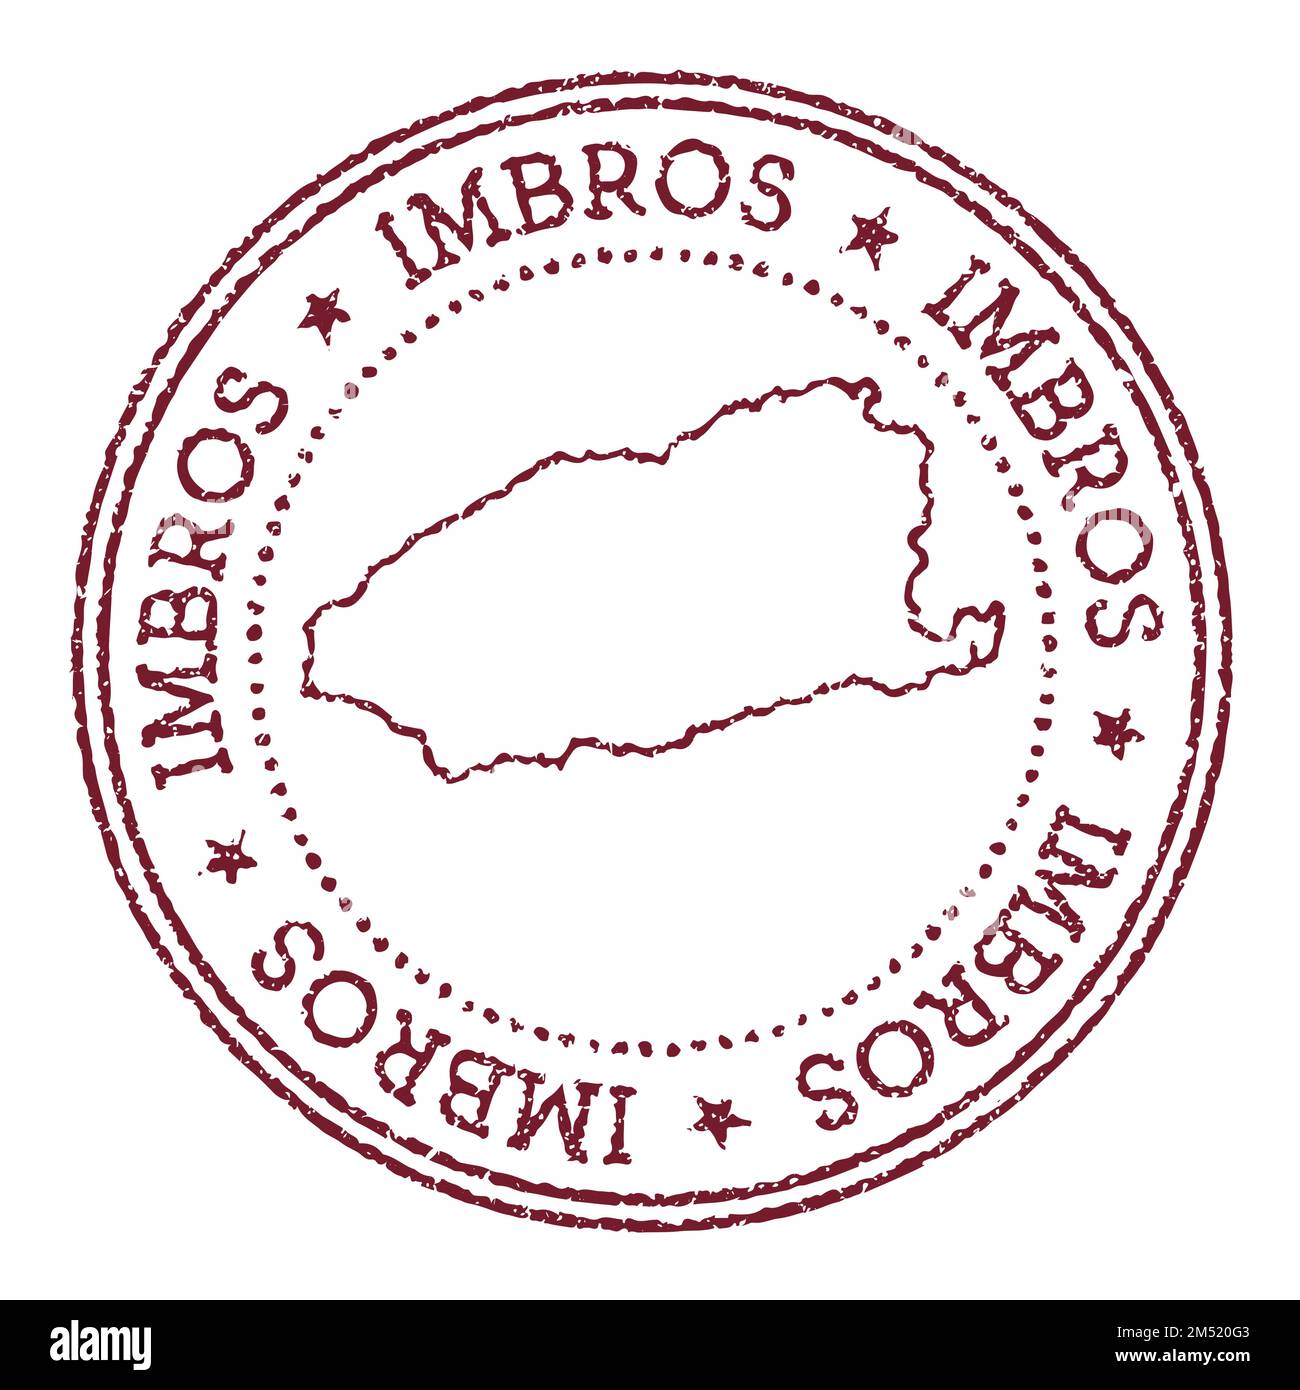 Imbros round rubber stamp with island map. Vintage red passport stamp with circular text and stars, vector illustration. Stock Vector